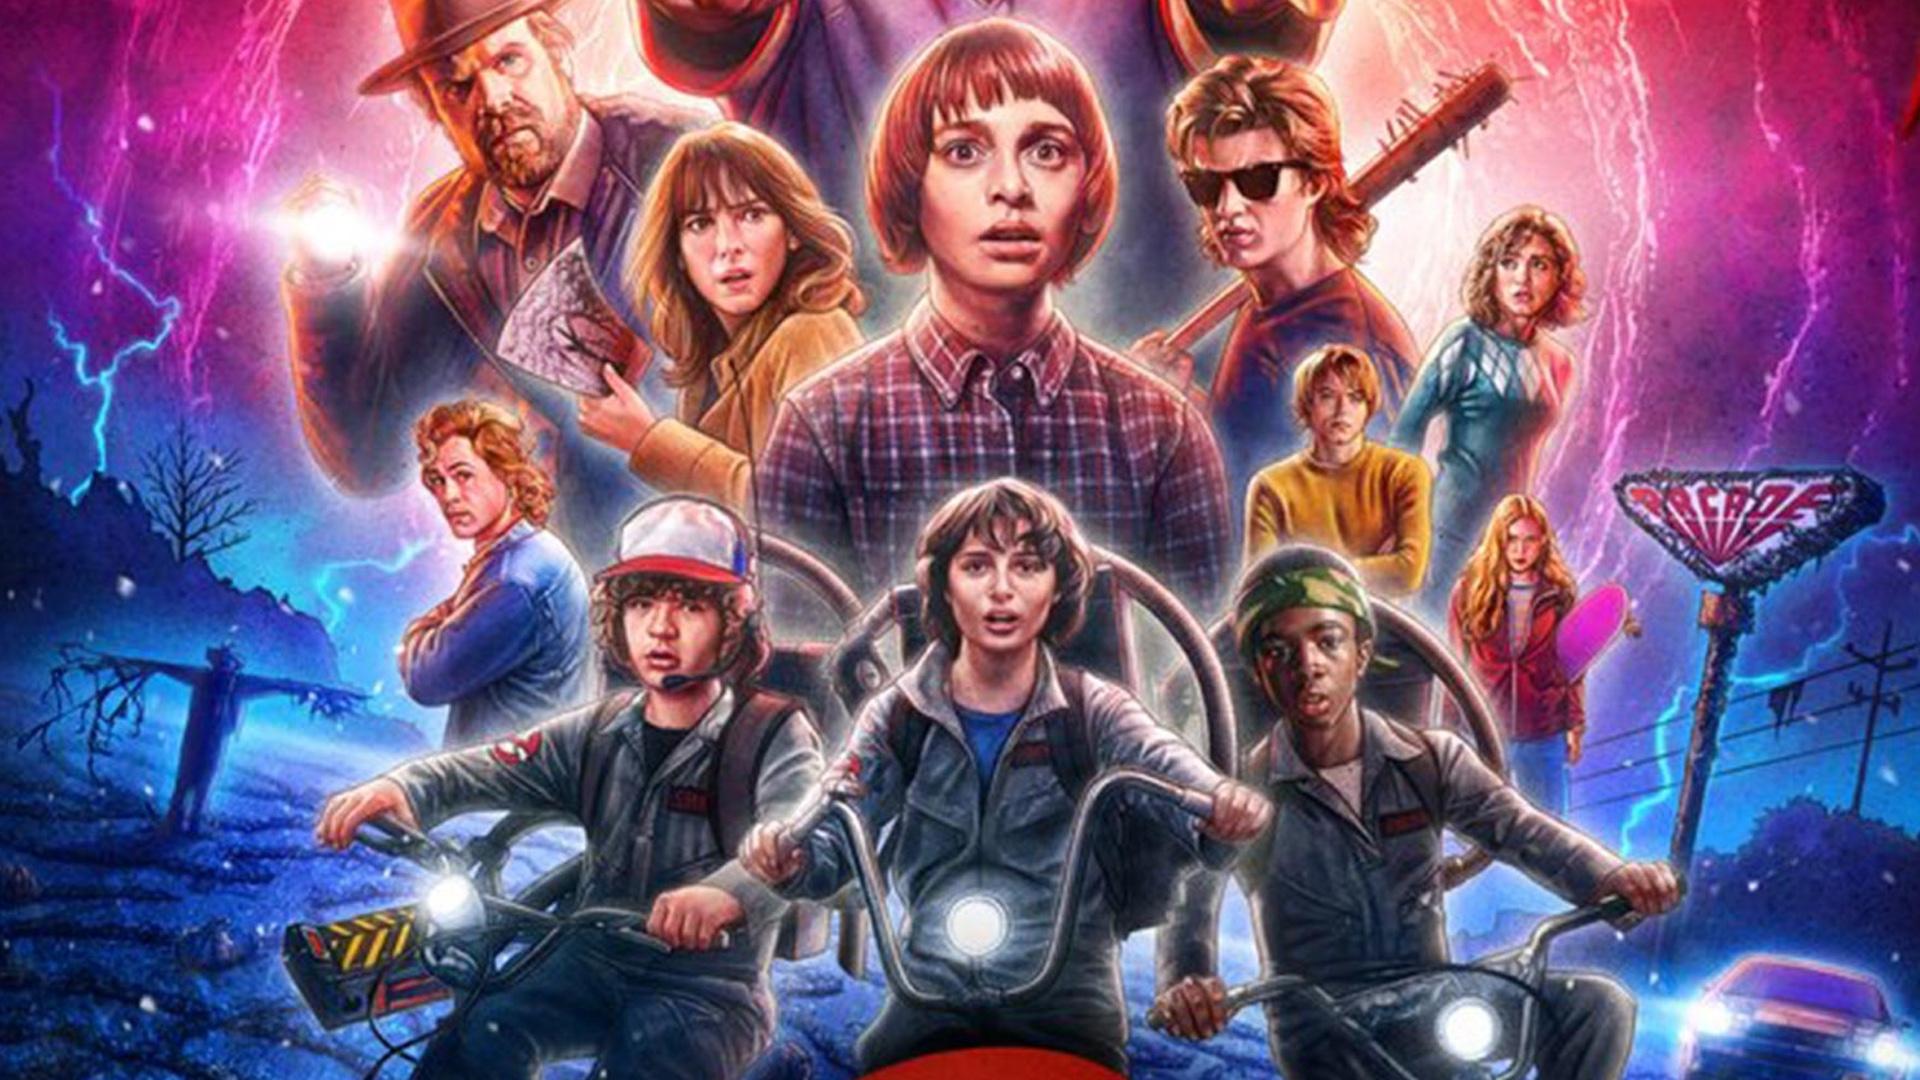 Stranger Things Season 3 Launched